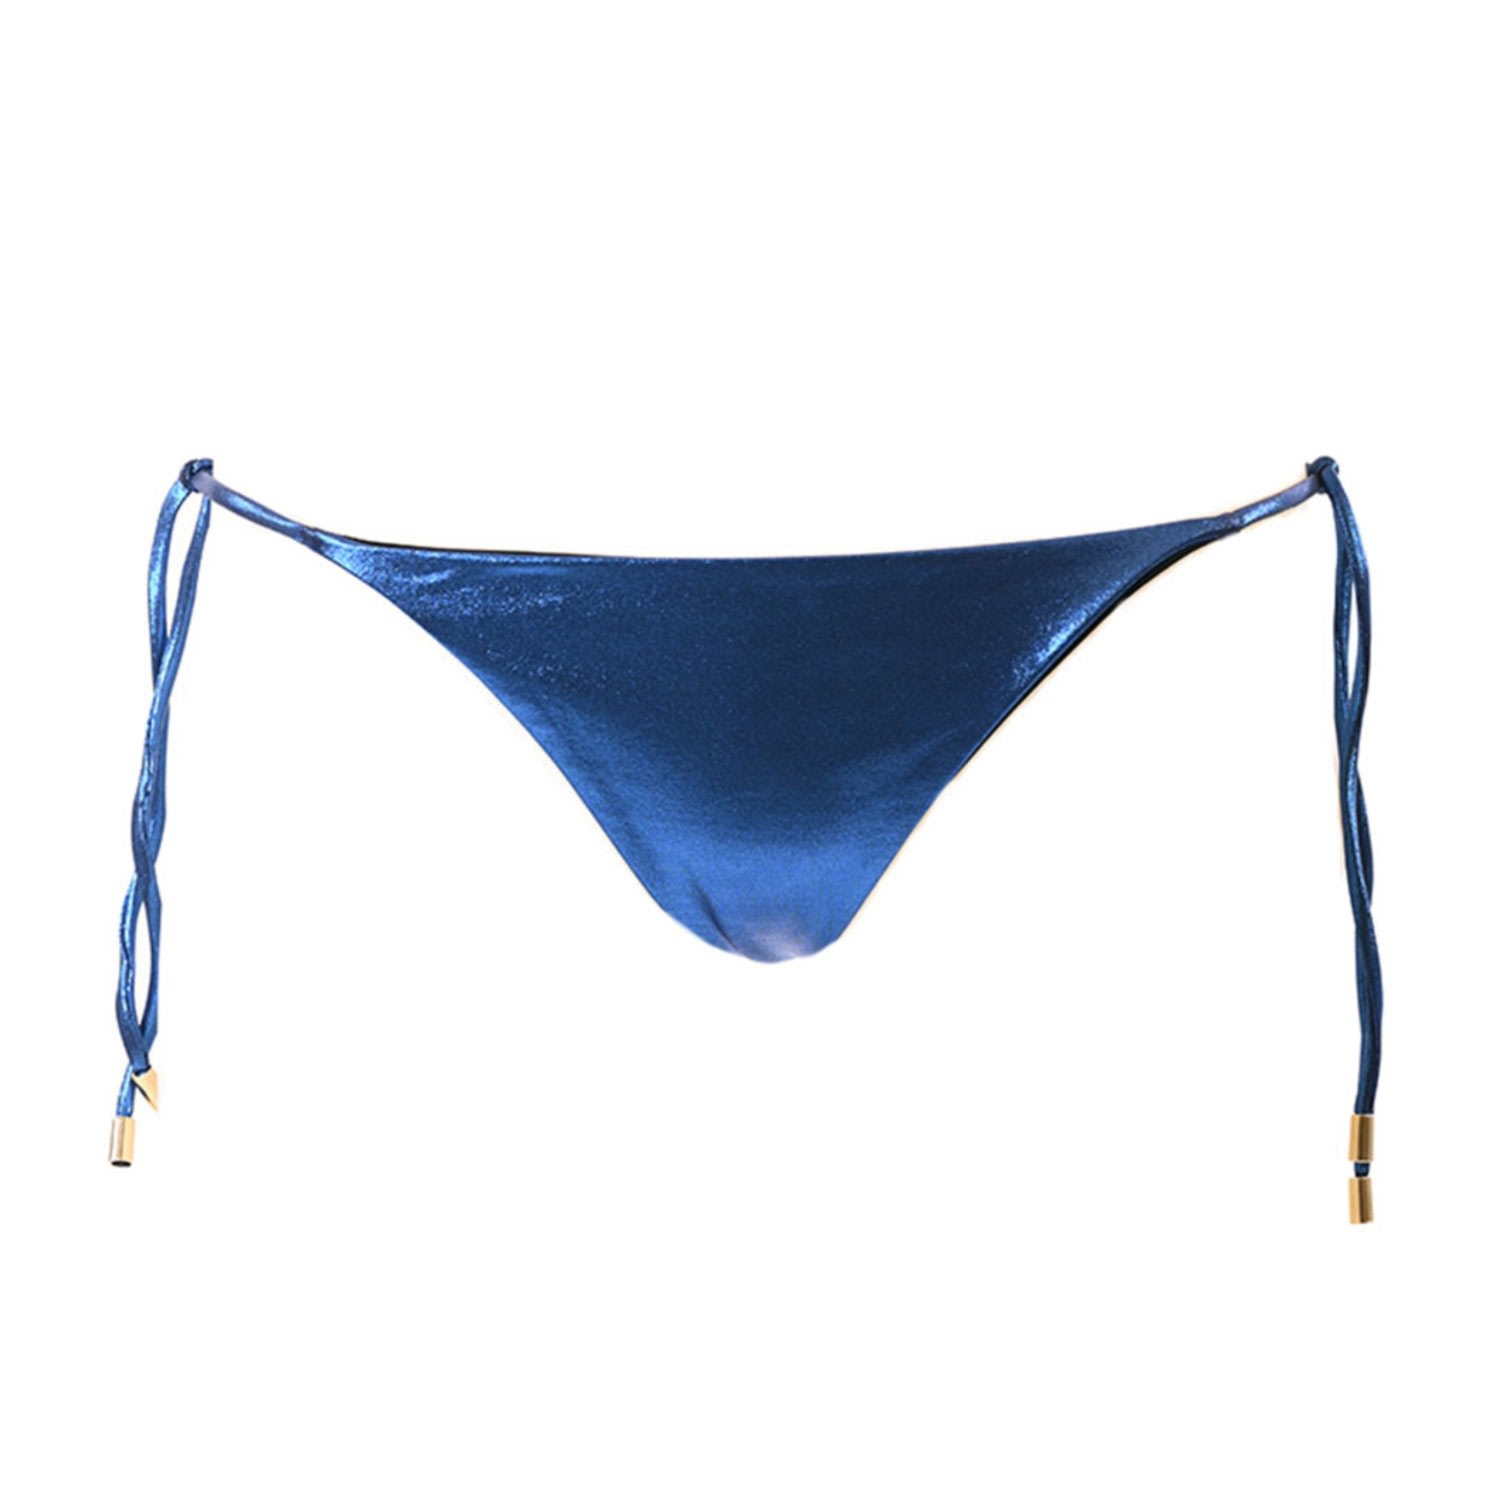 Women's Penelope Bottom Electric Blue Small Room 24